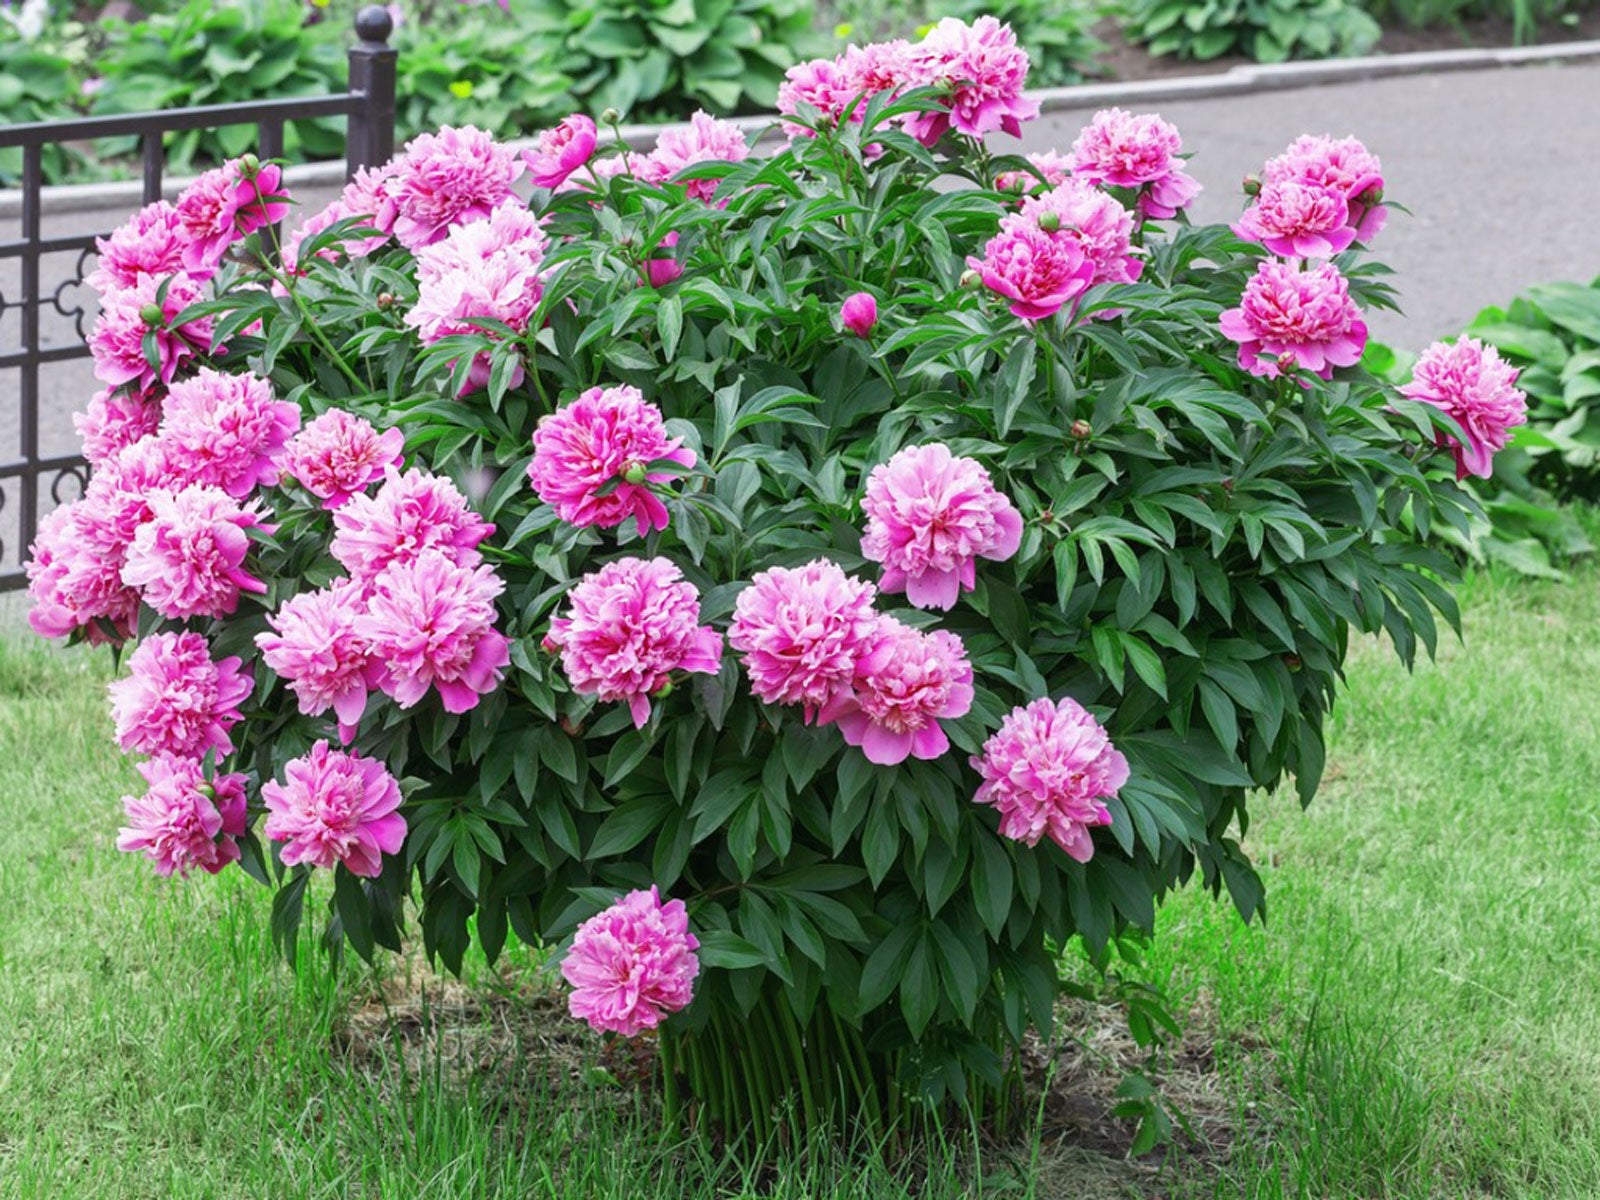 Transplanting A Peony – Can I Transplant Peonies That Are 